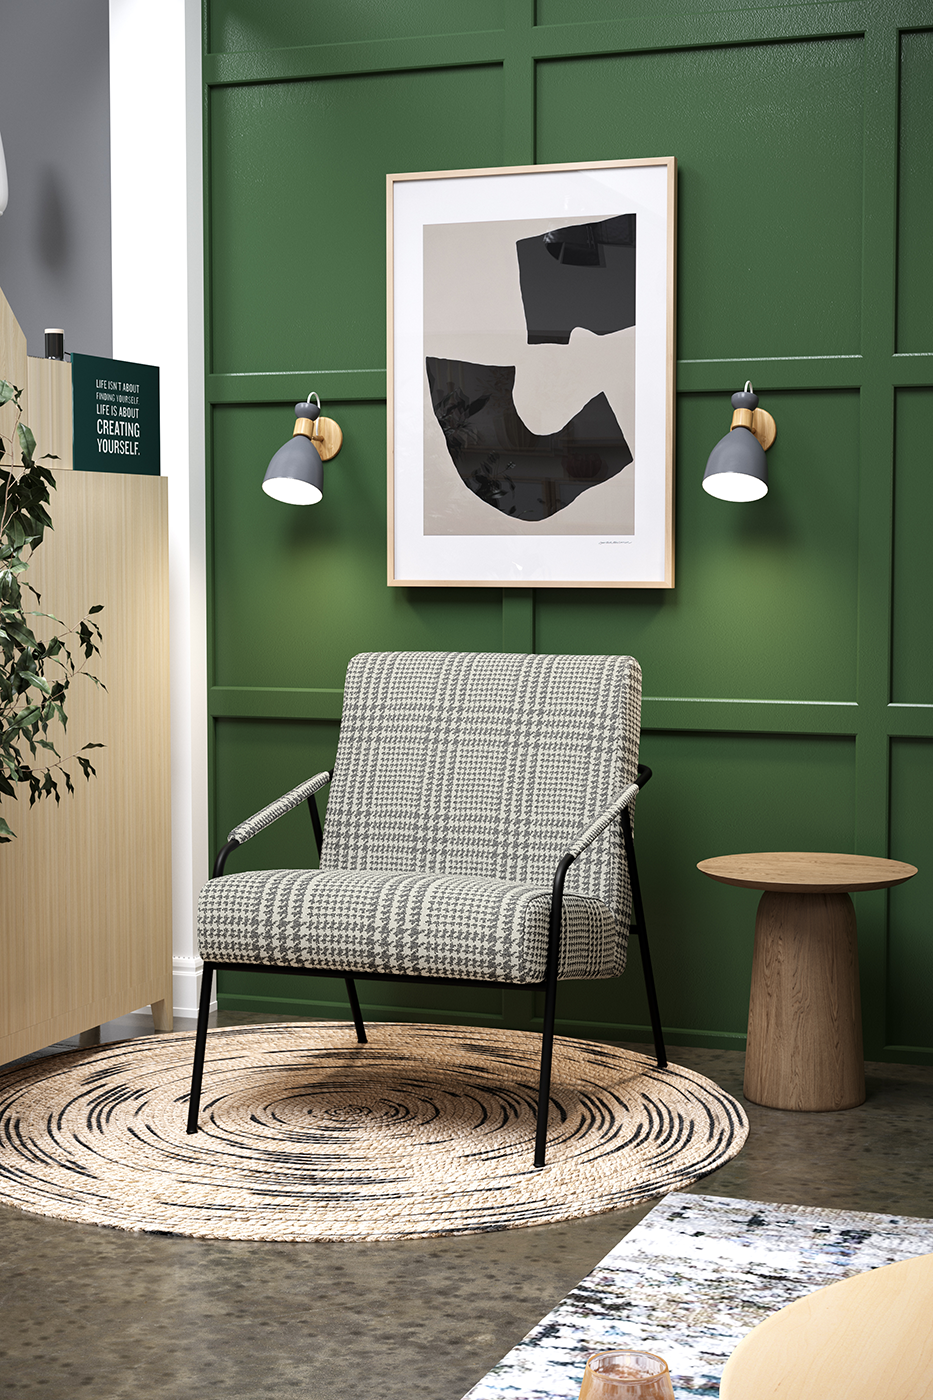 Lifestyle Rendering of an Upholstered Chair with Metal Frame